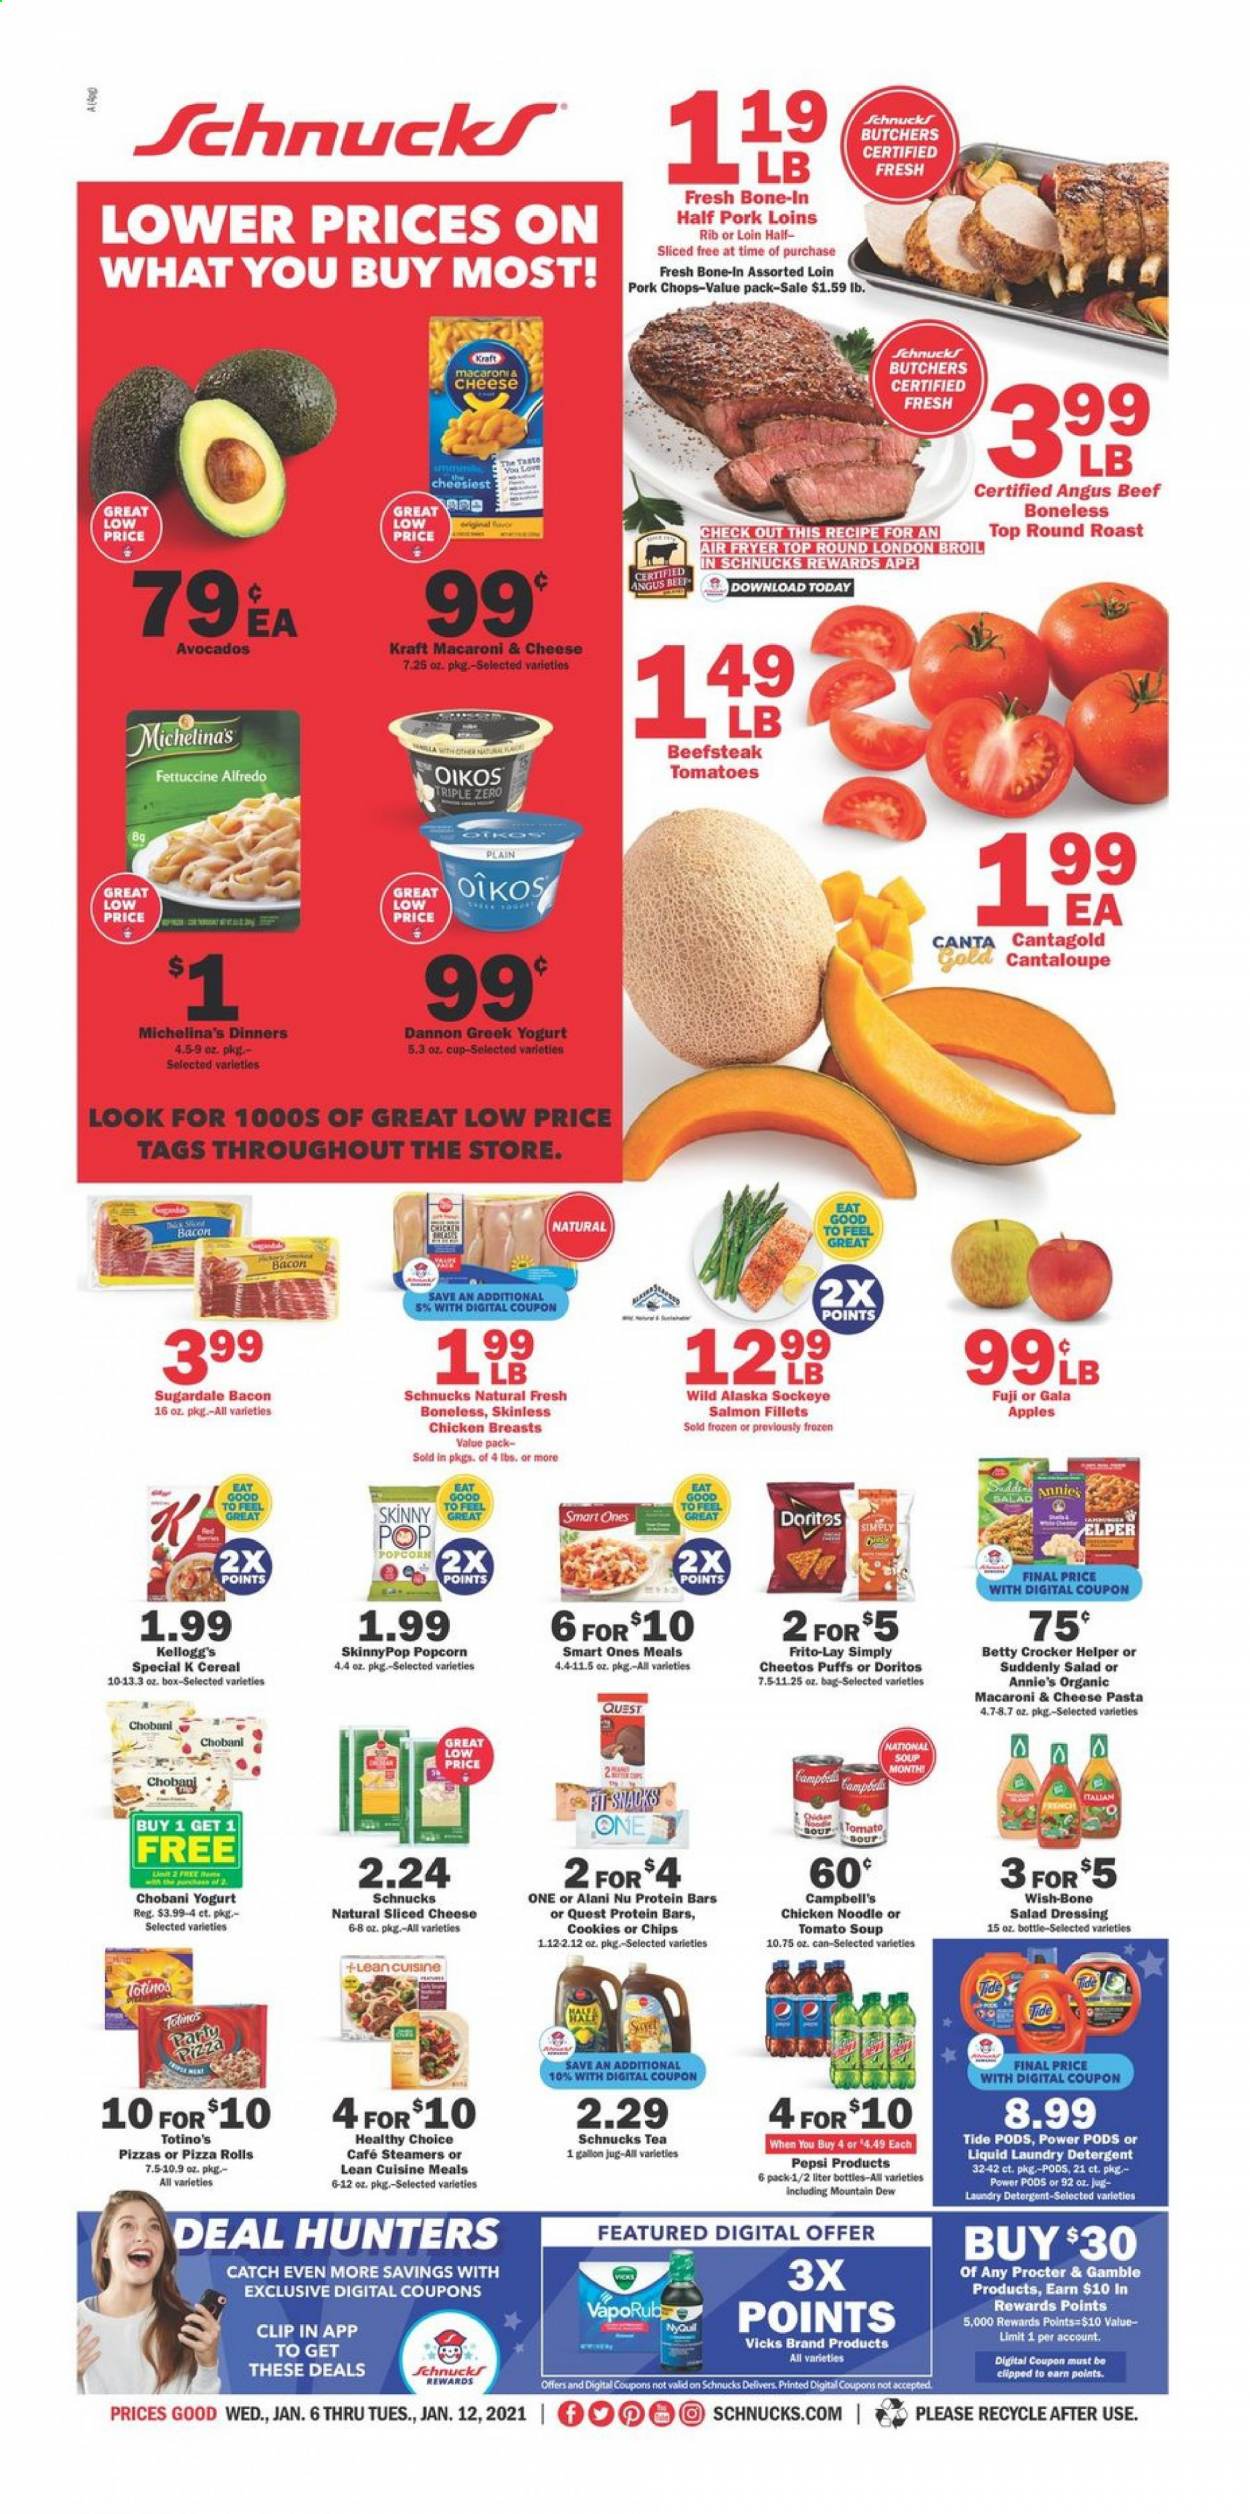 thumbnail - Schnucks Flyer - 01/06/2021 - 01/12/2021 - Sales products - cantaloupe, pizza rolls, puffs, apples, salmon, salmon fillet, Campbell's, macaroni & cheese, tomato soup, pizza, soup, Lean Cuisine, Healthy Choice, Annie's, Kraft®, bacon, sliced cheese, greek yoghurt, yoghurt, Oikos, Chobani, Dannon, cookies, Kellogg's, Doritos, Cheetos, popcorn, Frito-Lay, cereals, protein bar, pasta, noodles, salad dressing, dressing, Mountain Dew, Pepsi, tea, chicken breasts, beef meat, round roast, pork chops, pork meat, detergent, Tide, laundry detergent, NyQuil, VapoRub, Vicks. Page 1.